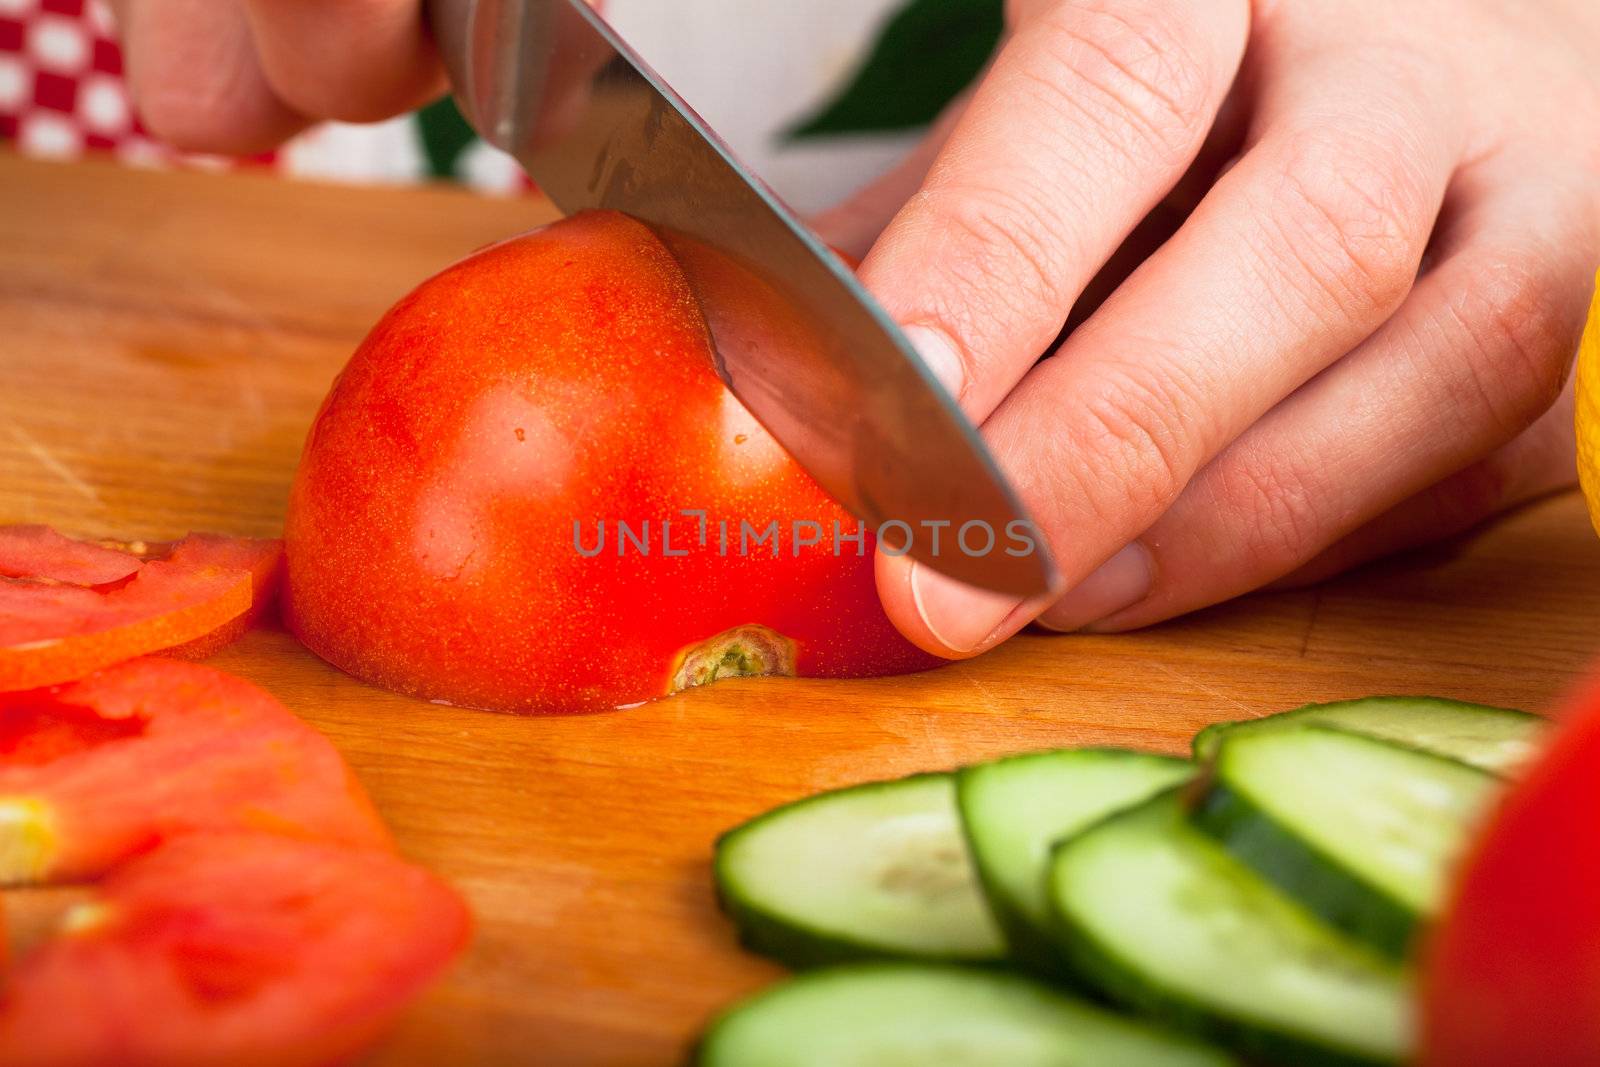 Woman cutting vegetables (tomato, cucumber, salad) on a wooden table